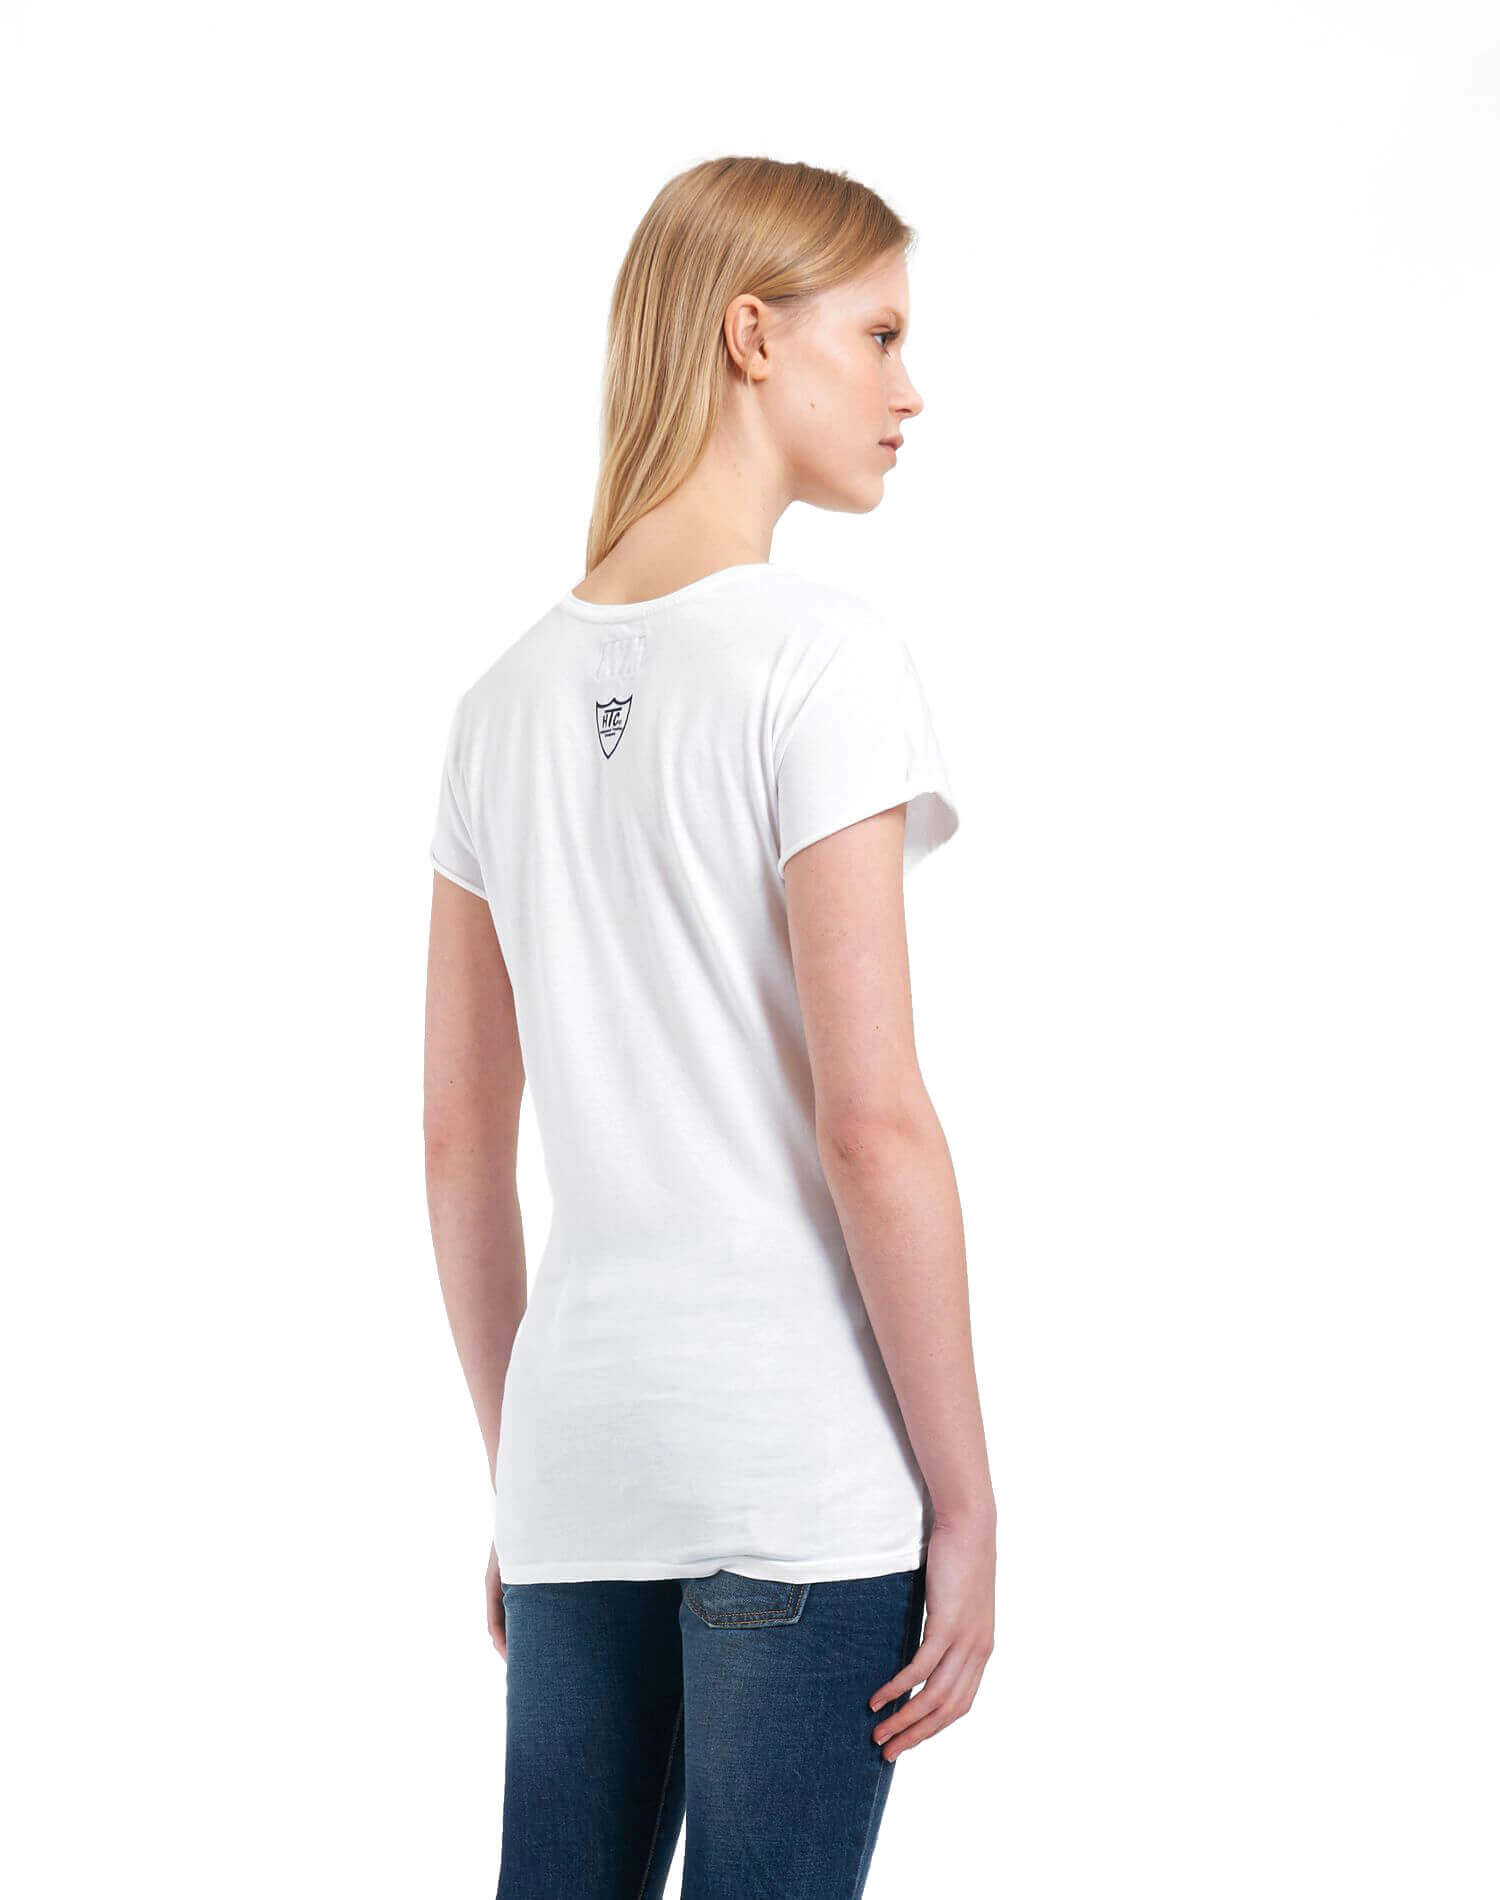 HTC BASIC T-SHIRT WOMAN White cotton t-shirt with black HTC Los Angeles shield logo printed on the front. HTC LOS ANGELES